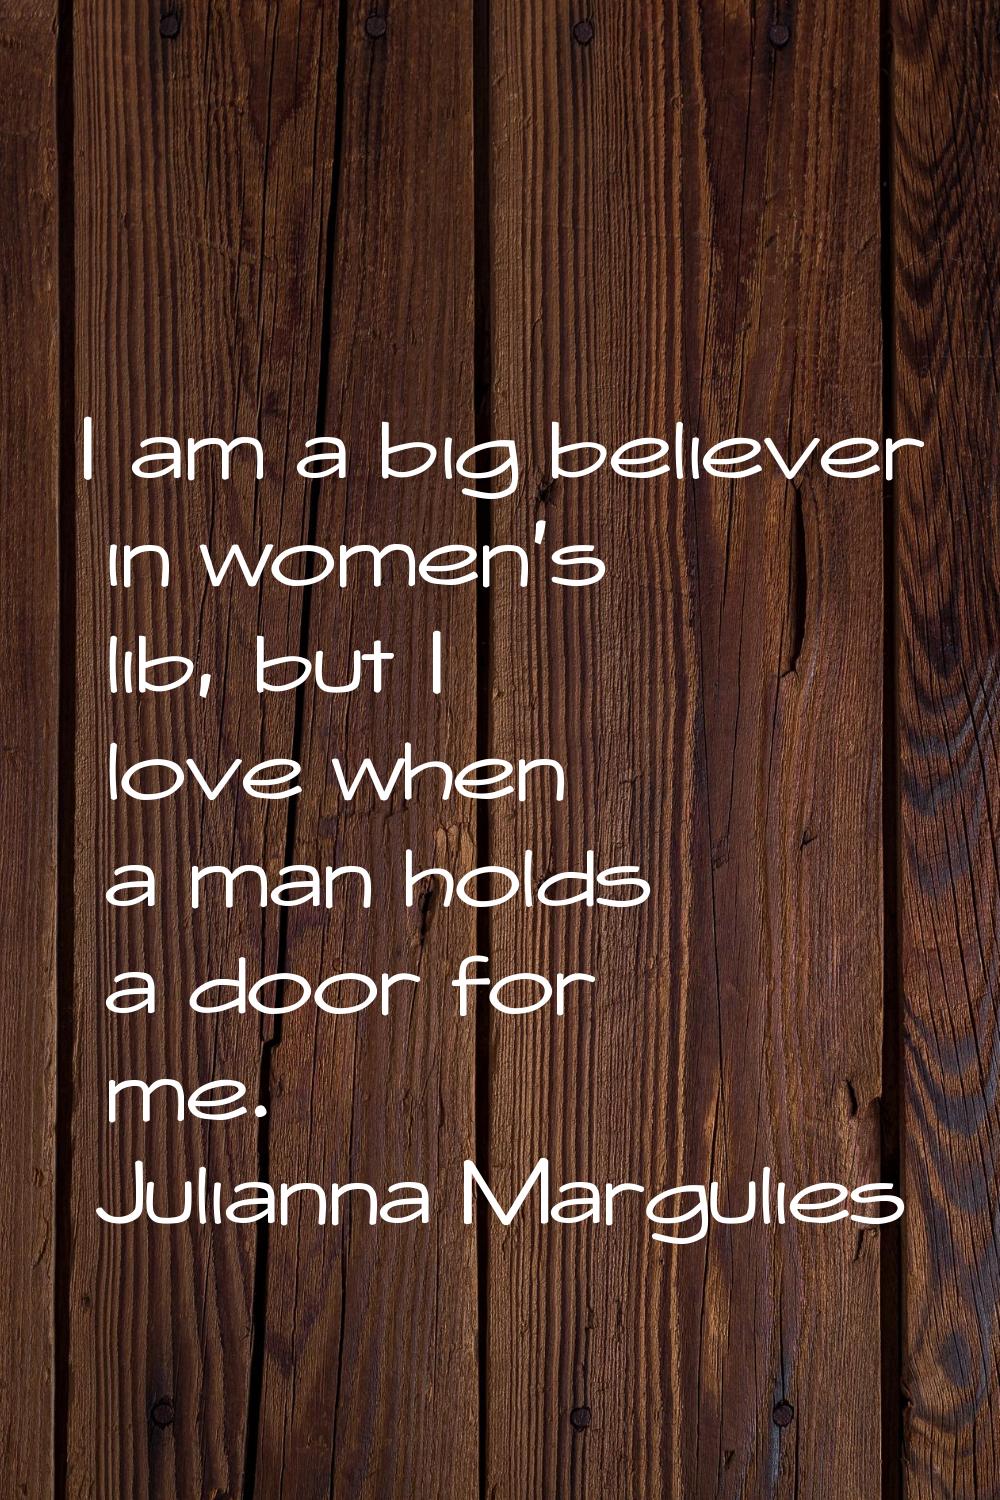 I am a big believer in women's lib, but I love when a man holds a door for me.